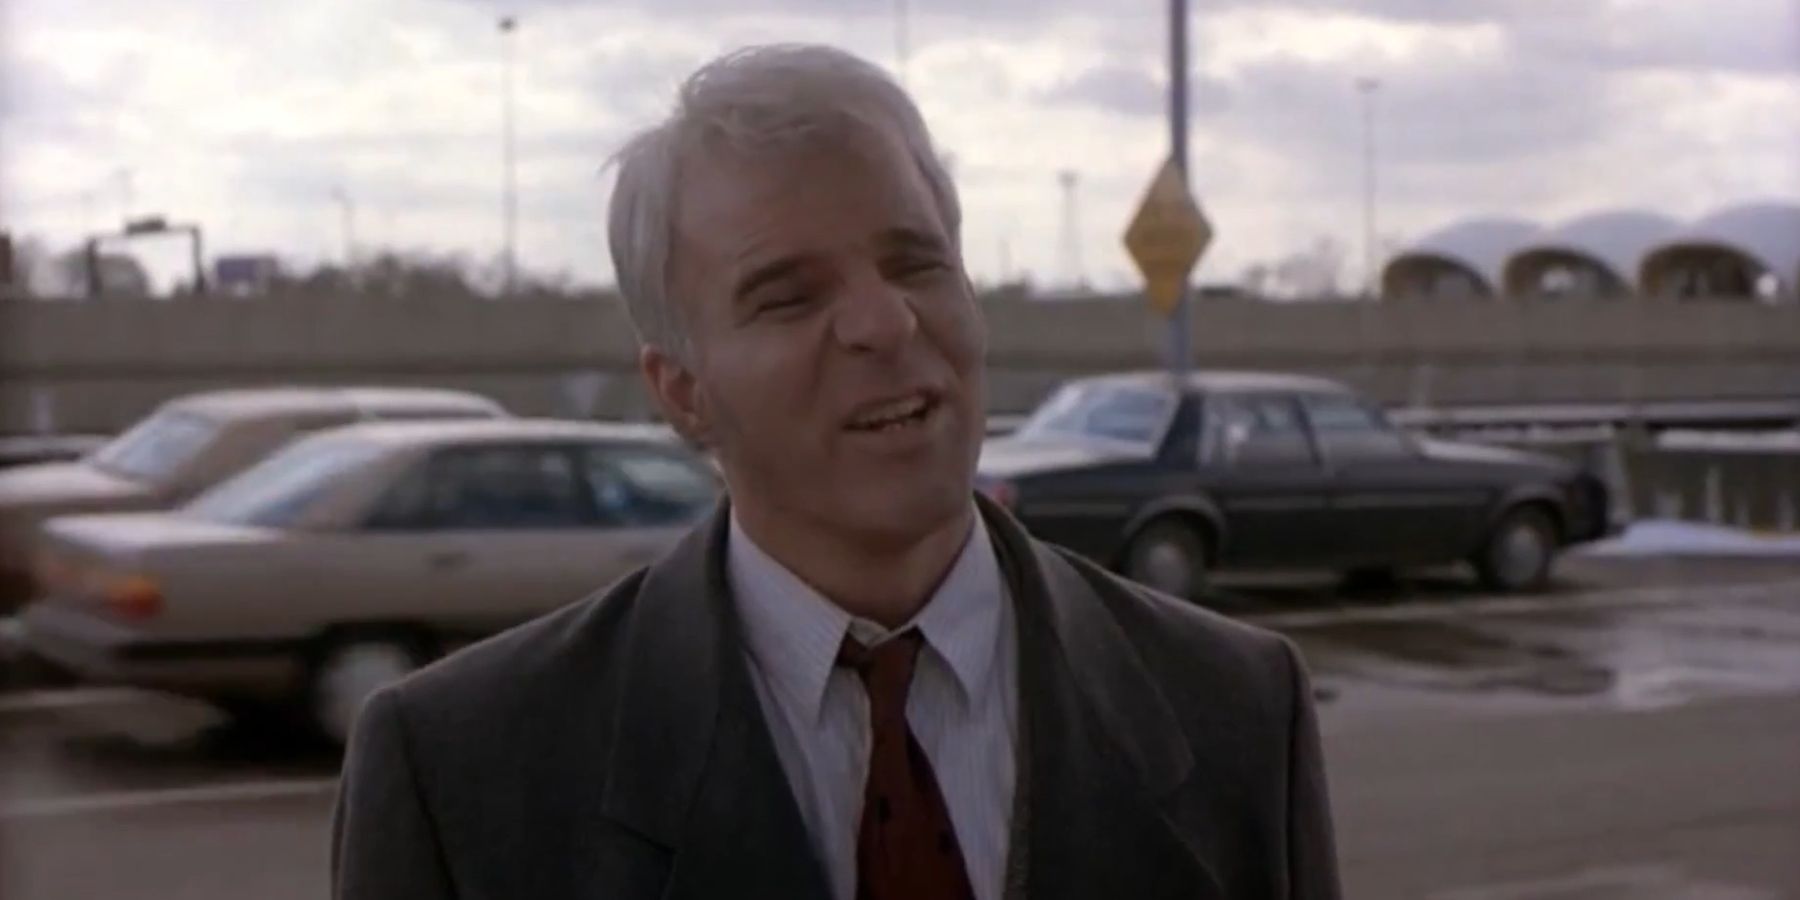 Neal insulting the Taxi manager in Planes, Trains, & Automobiles